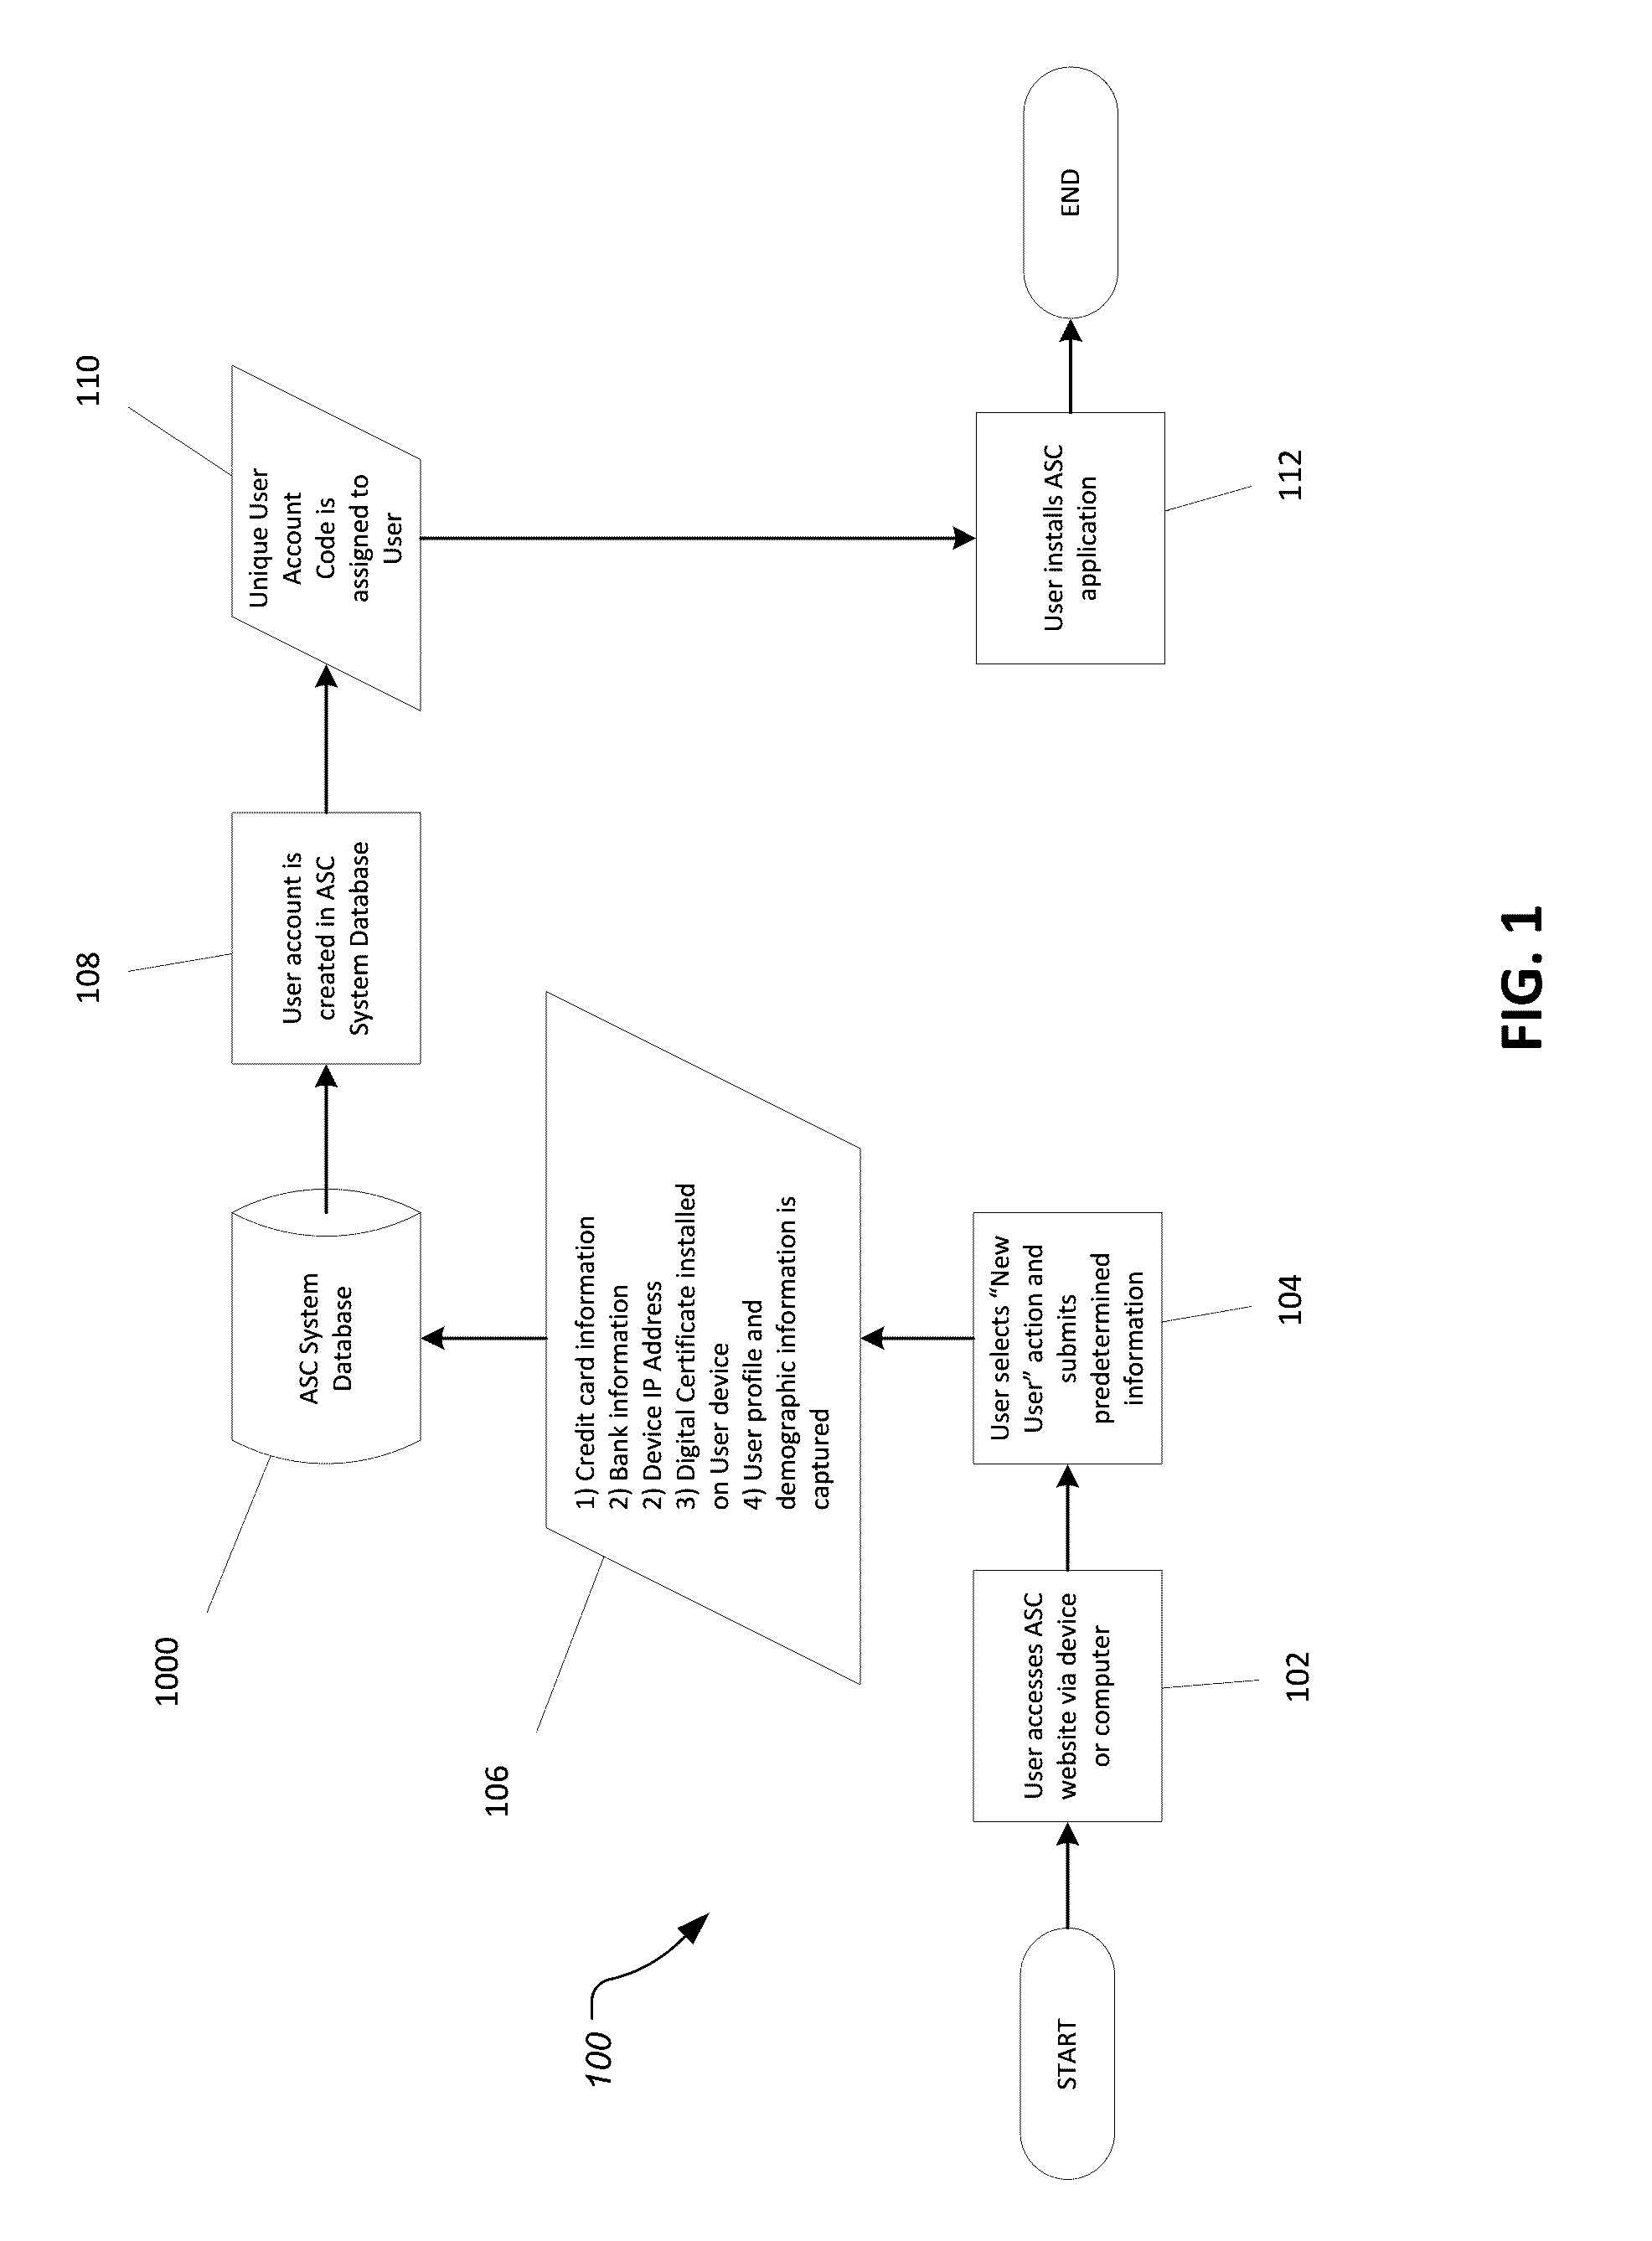 Authenticated scannable code system